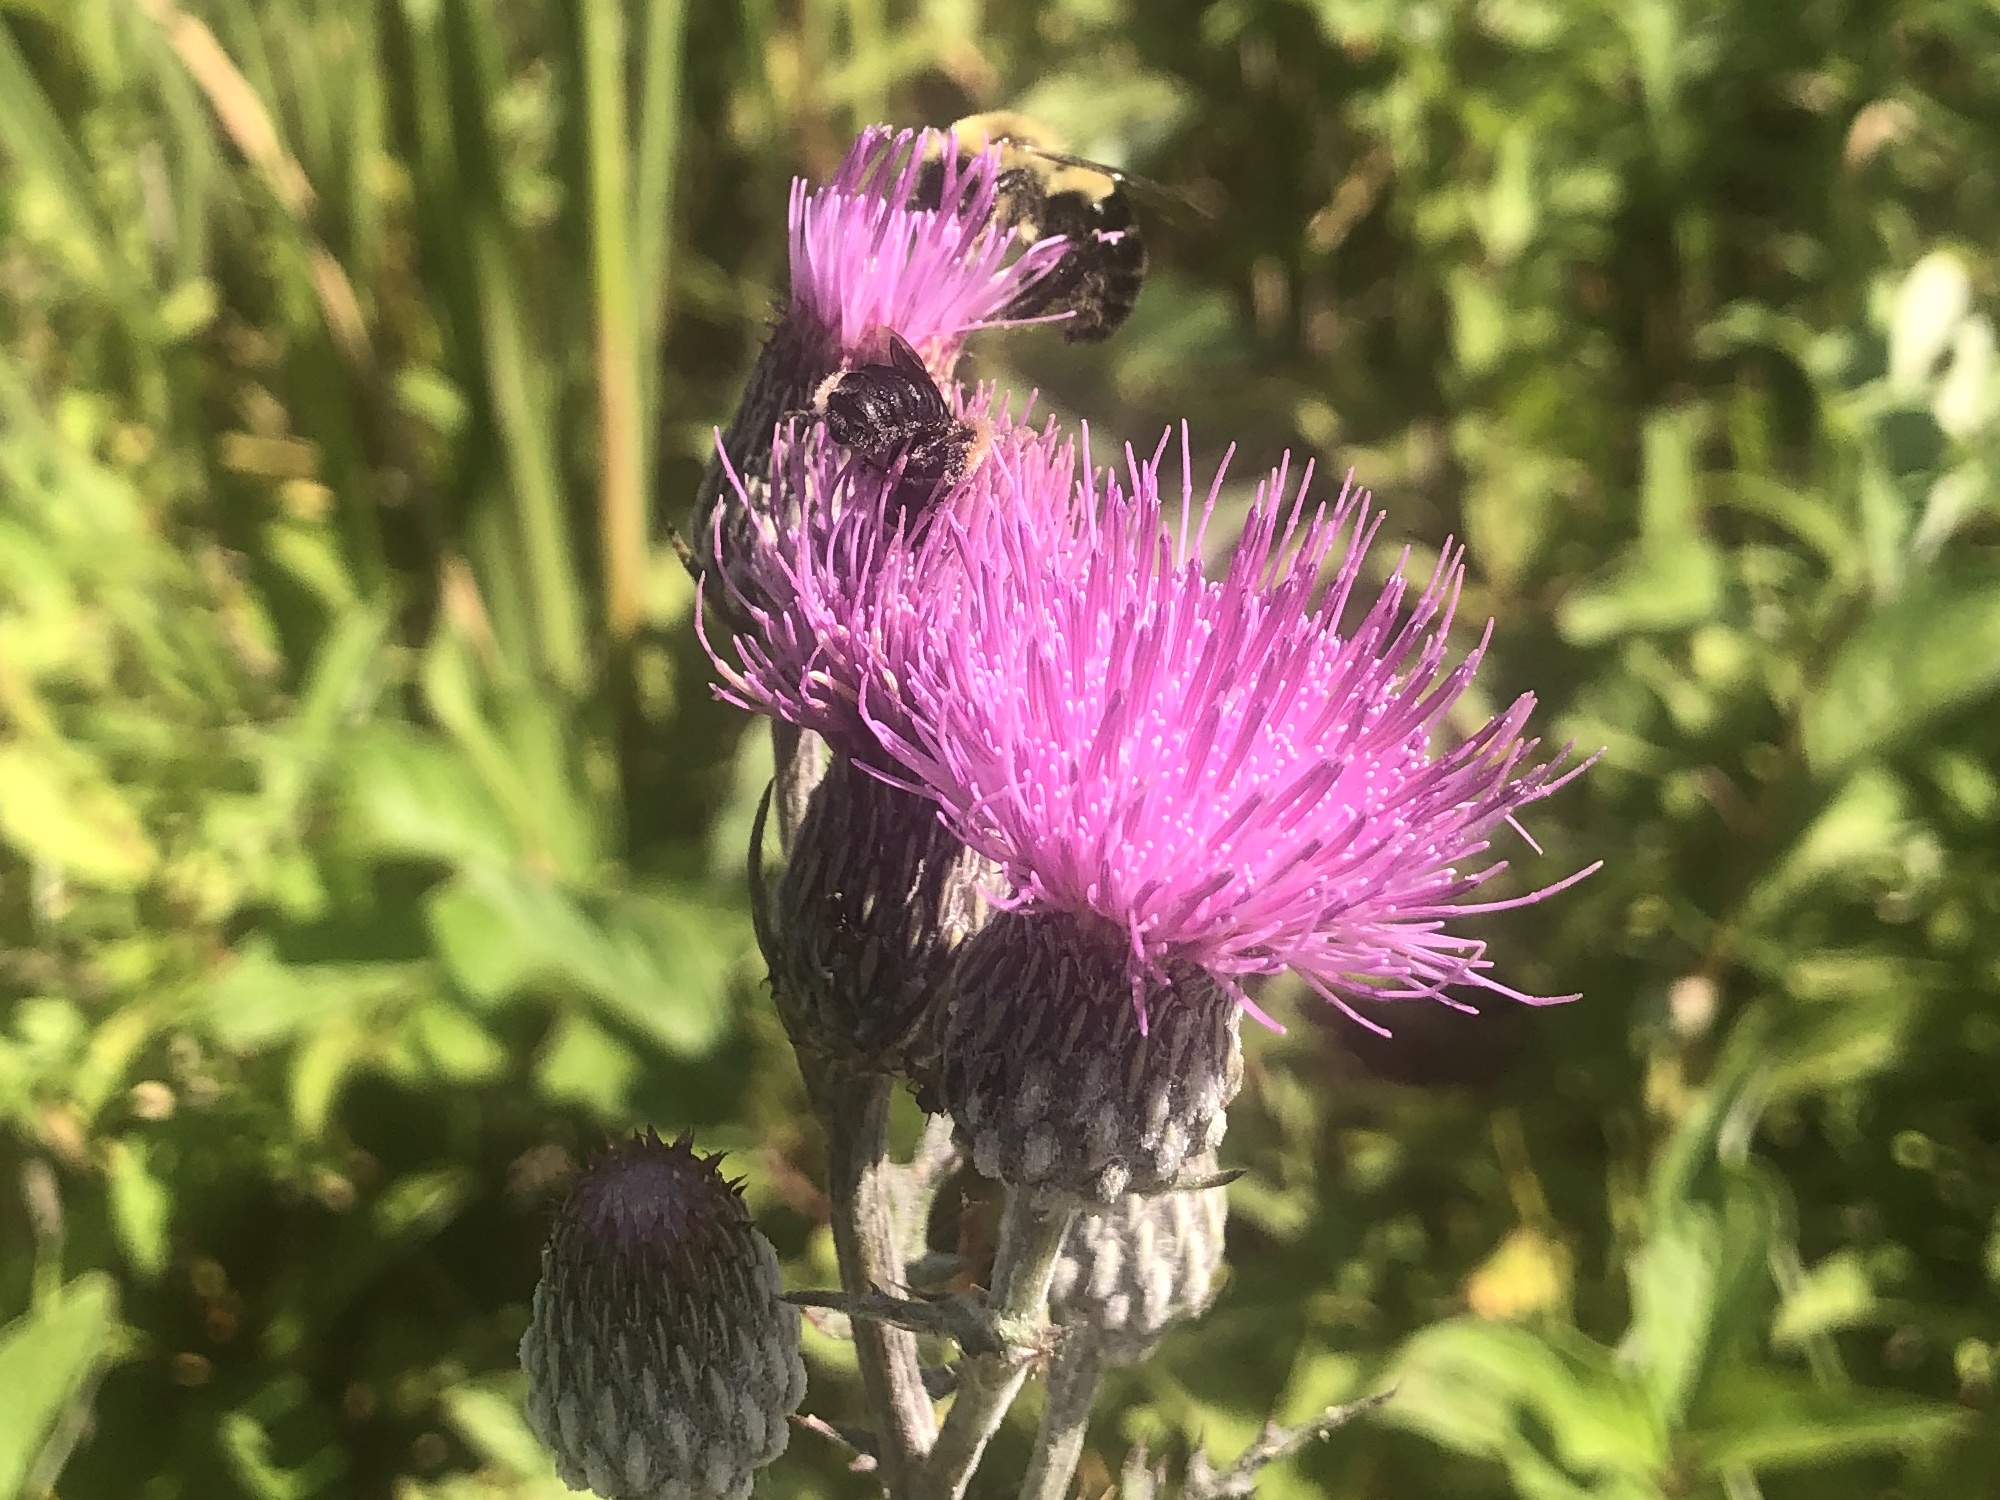 Bee on Swamp Thistle near cattails along shore of Lake Wingra along Arboretum Drive in Madison, Wisconsin on August 17, 2022.